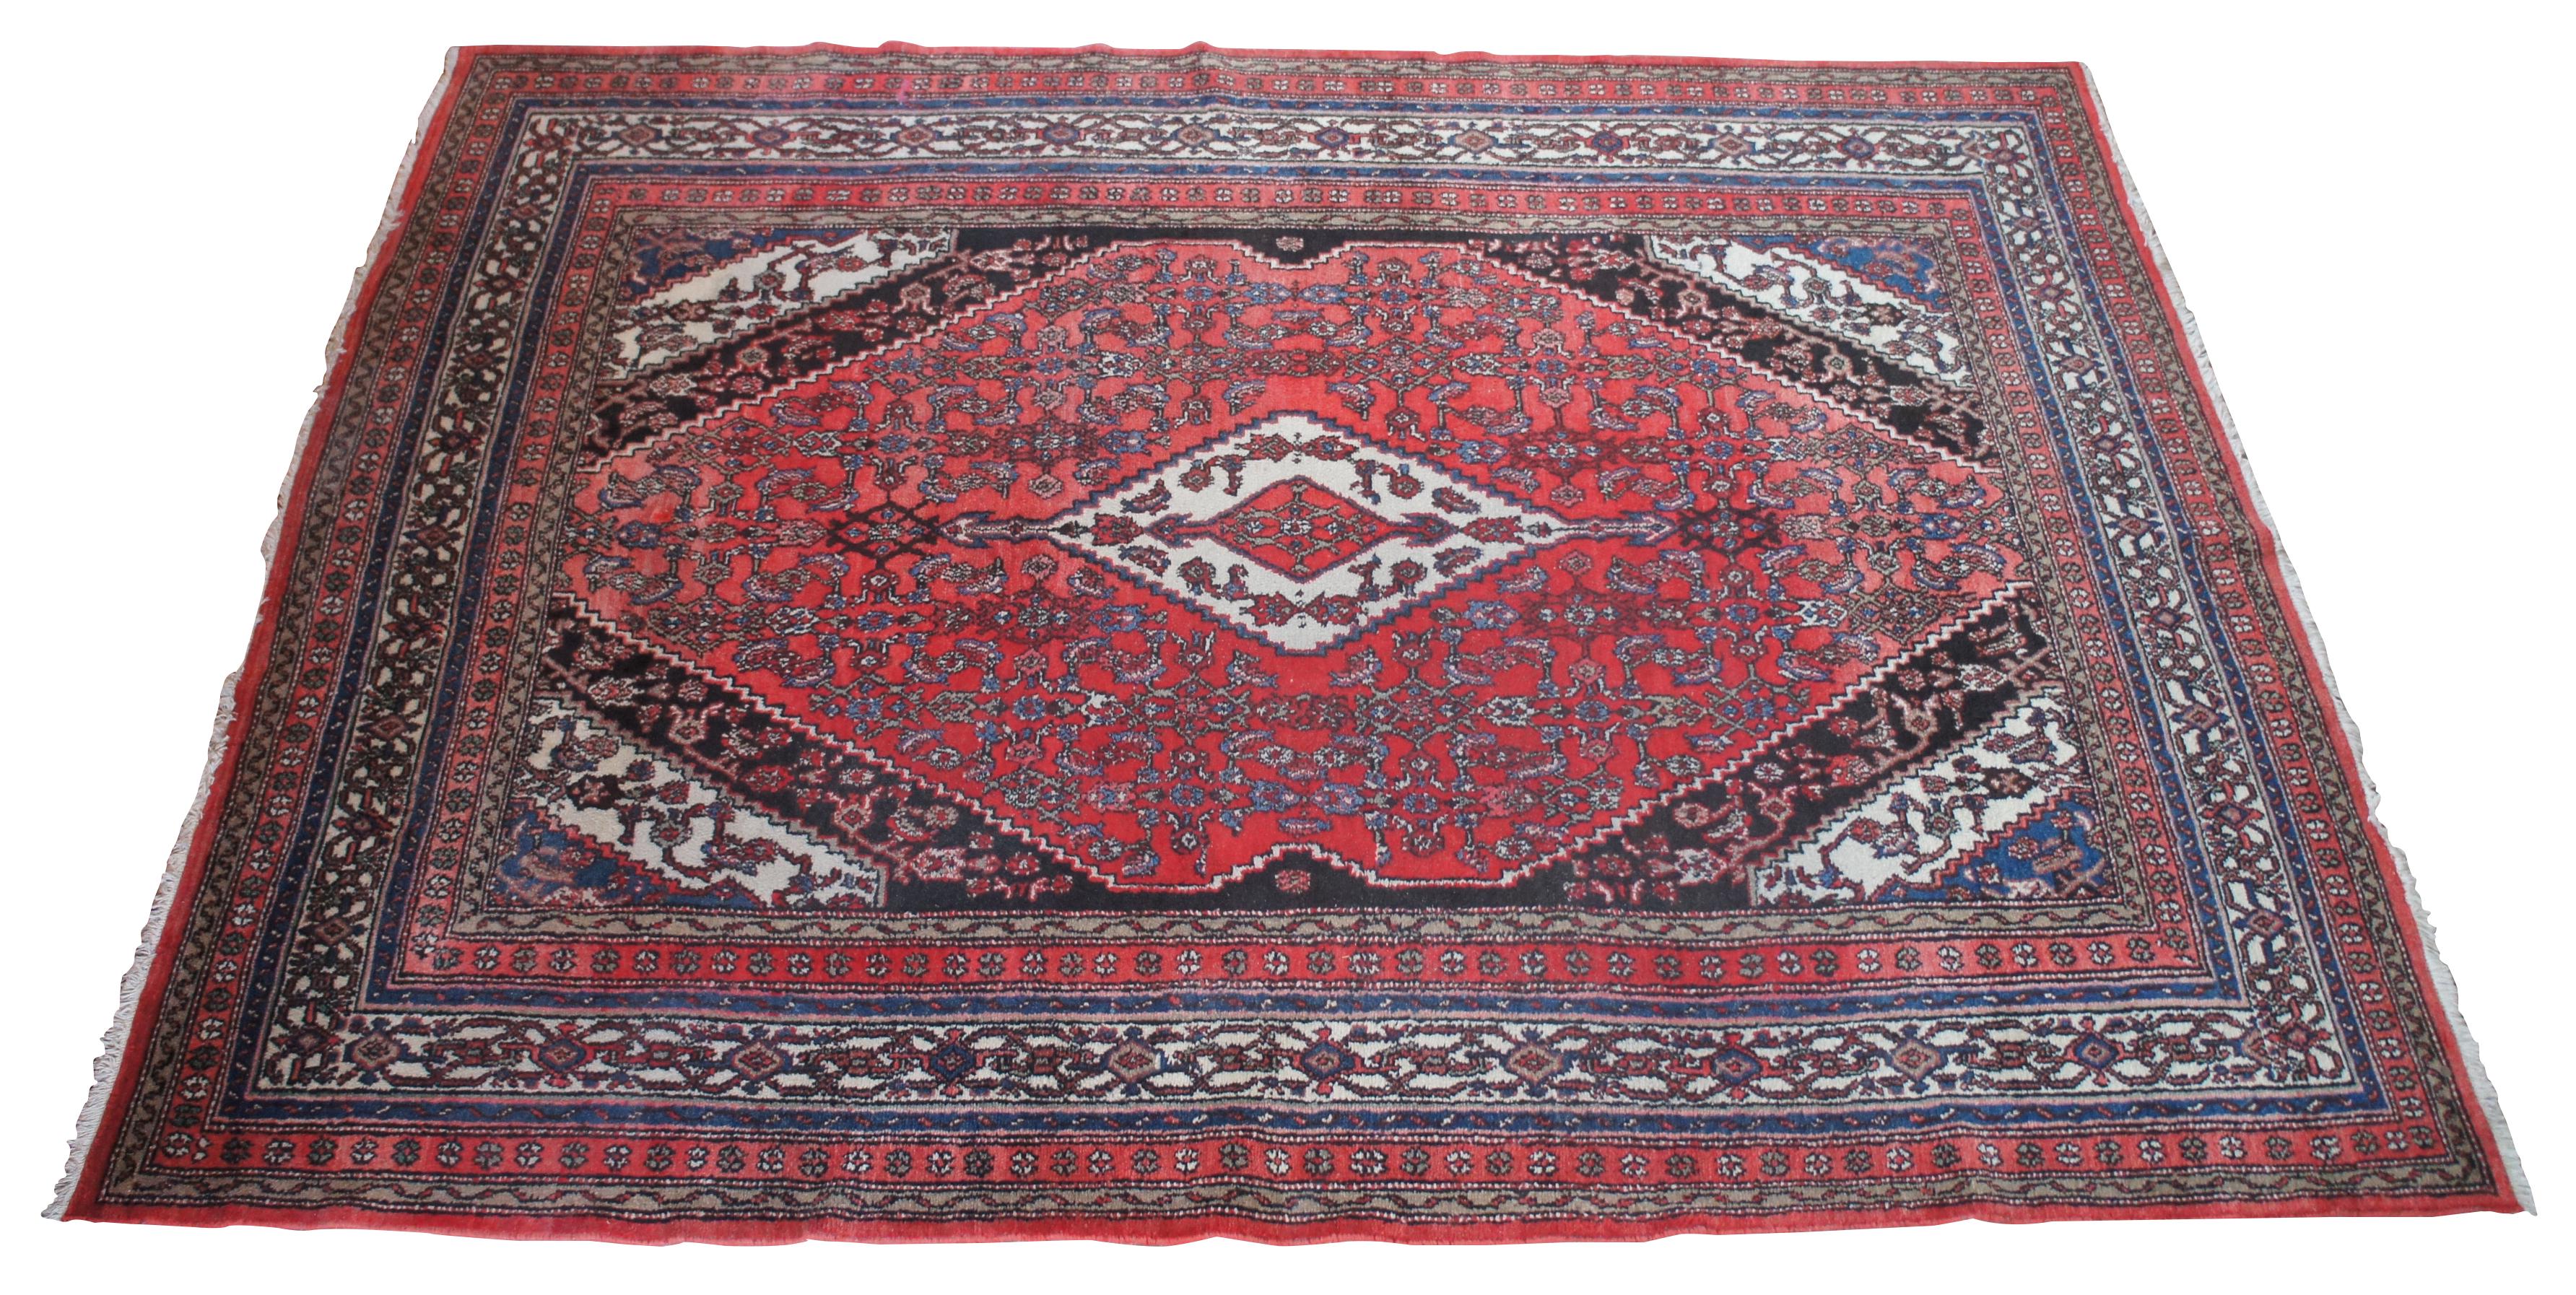 Large antique floral all over area rug featuring a red field with ornate floral accents in greens, blues, pink and brown. Measures: 8.5' x 12'.
 